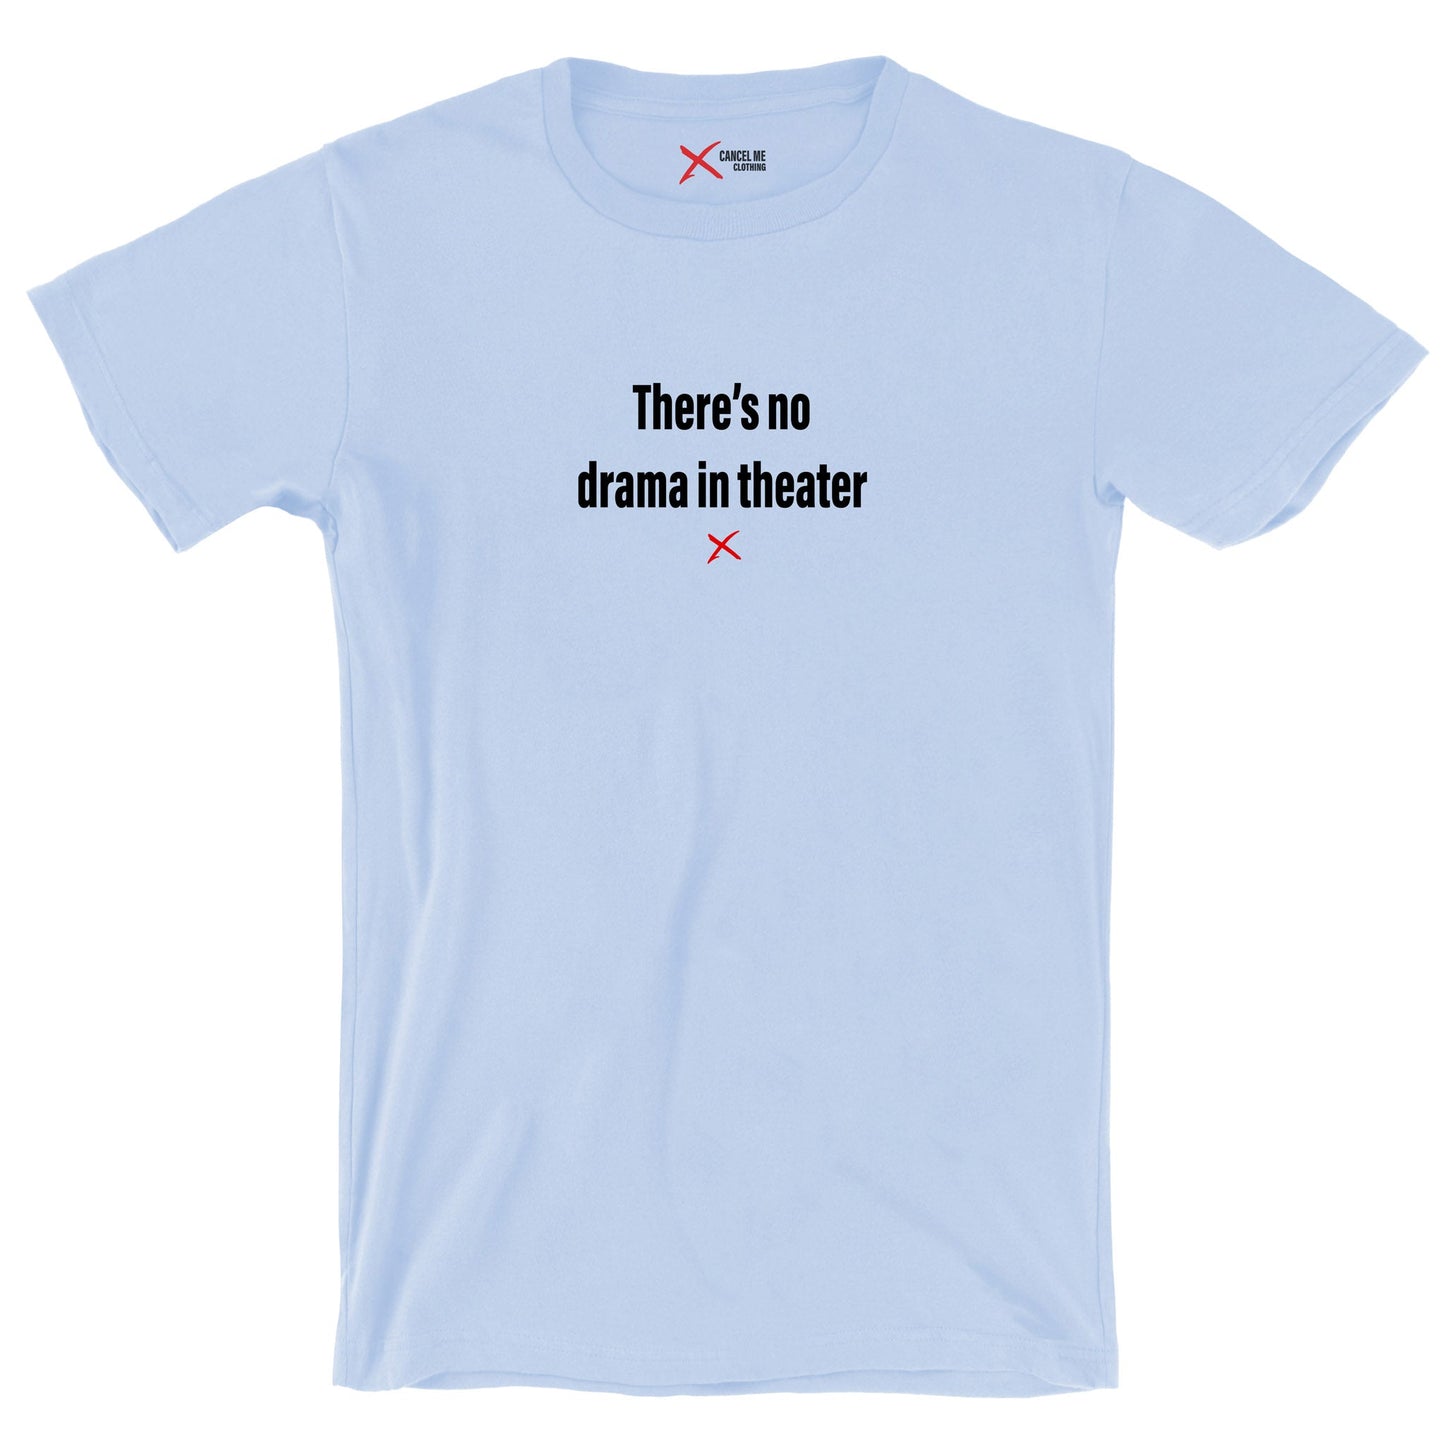 There's no drama in theater - Shirt